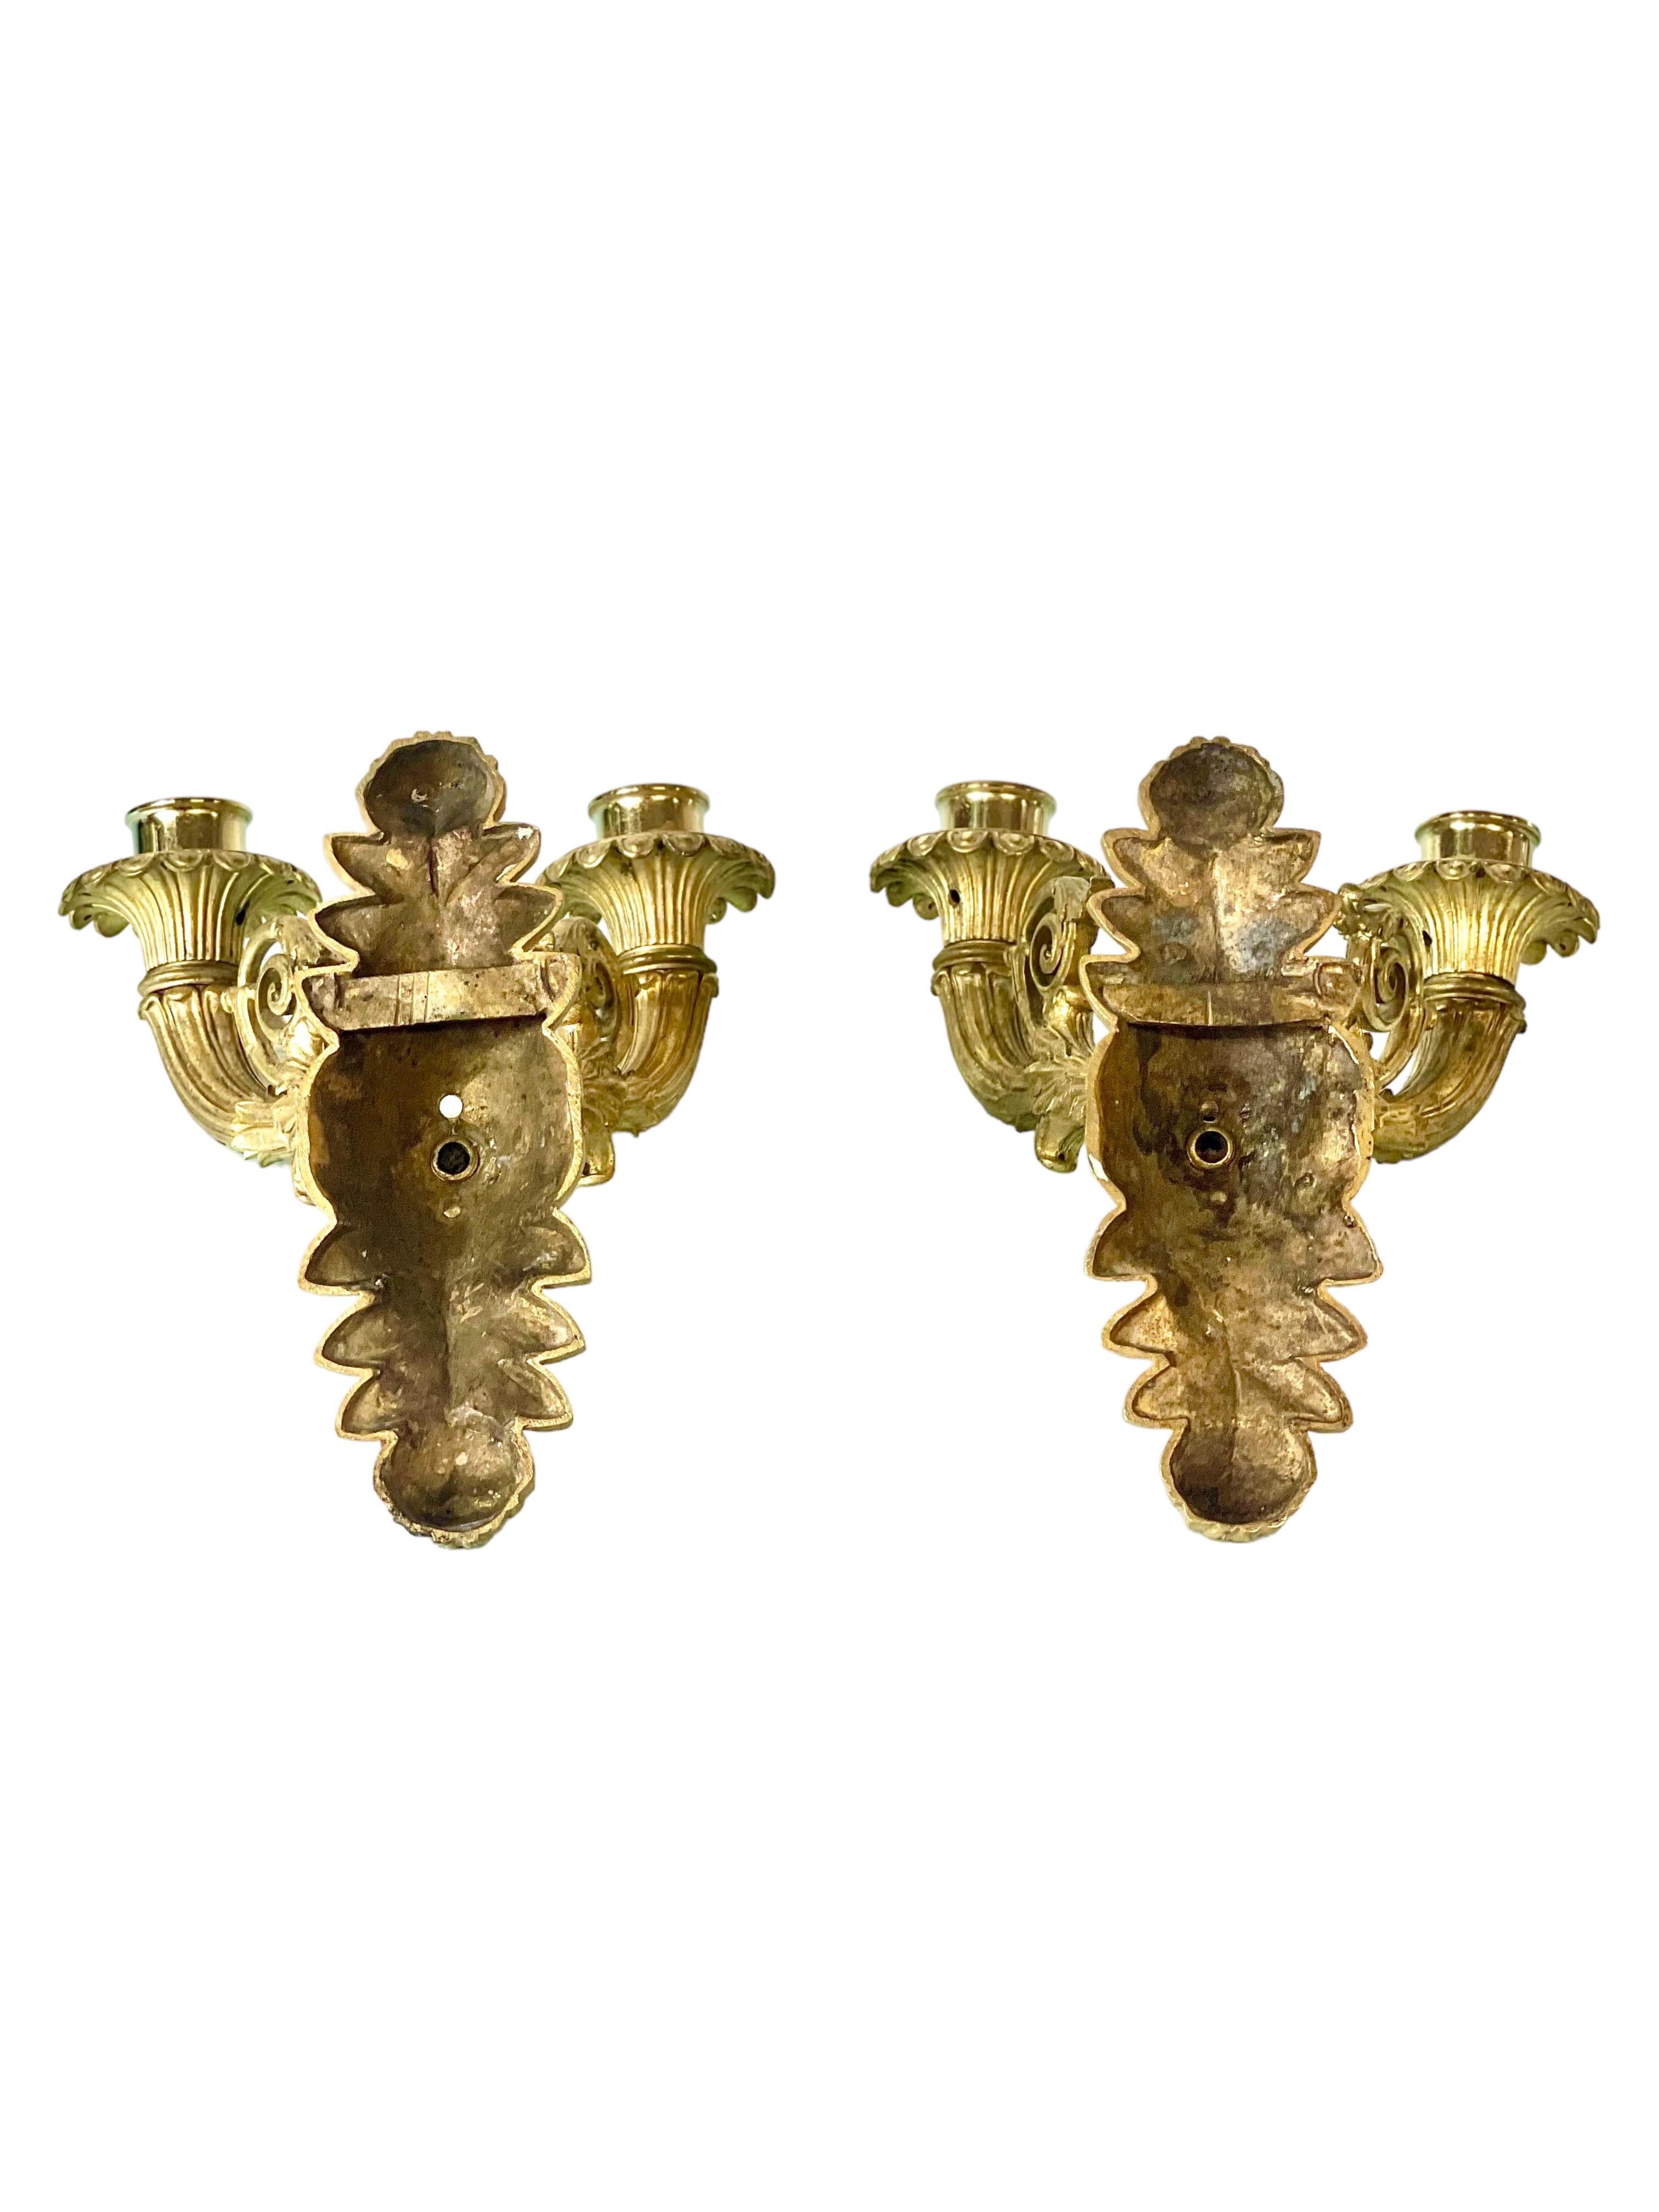 Pair of French Restauration Period Gilded Bronze Wall Sconces For Sale 5